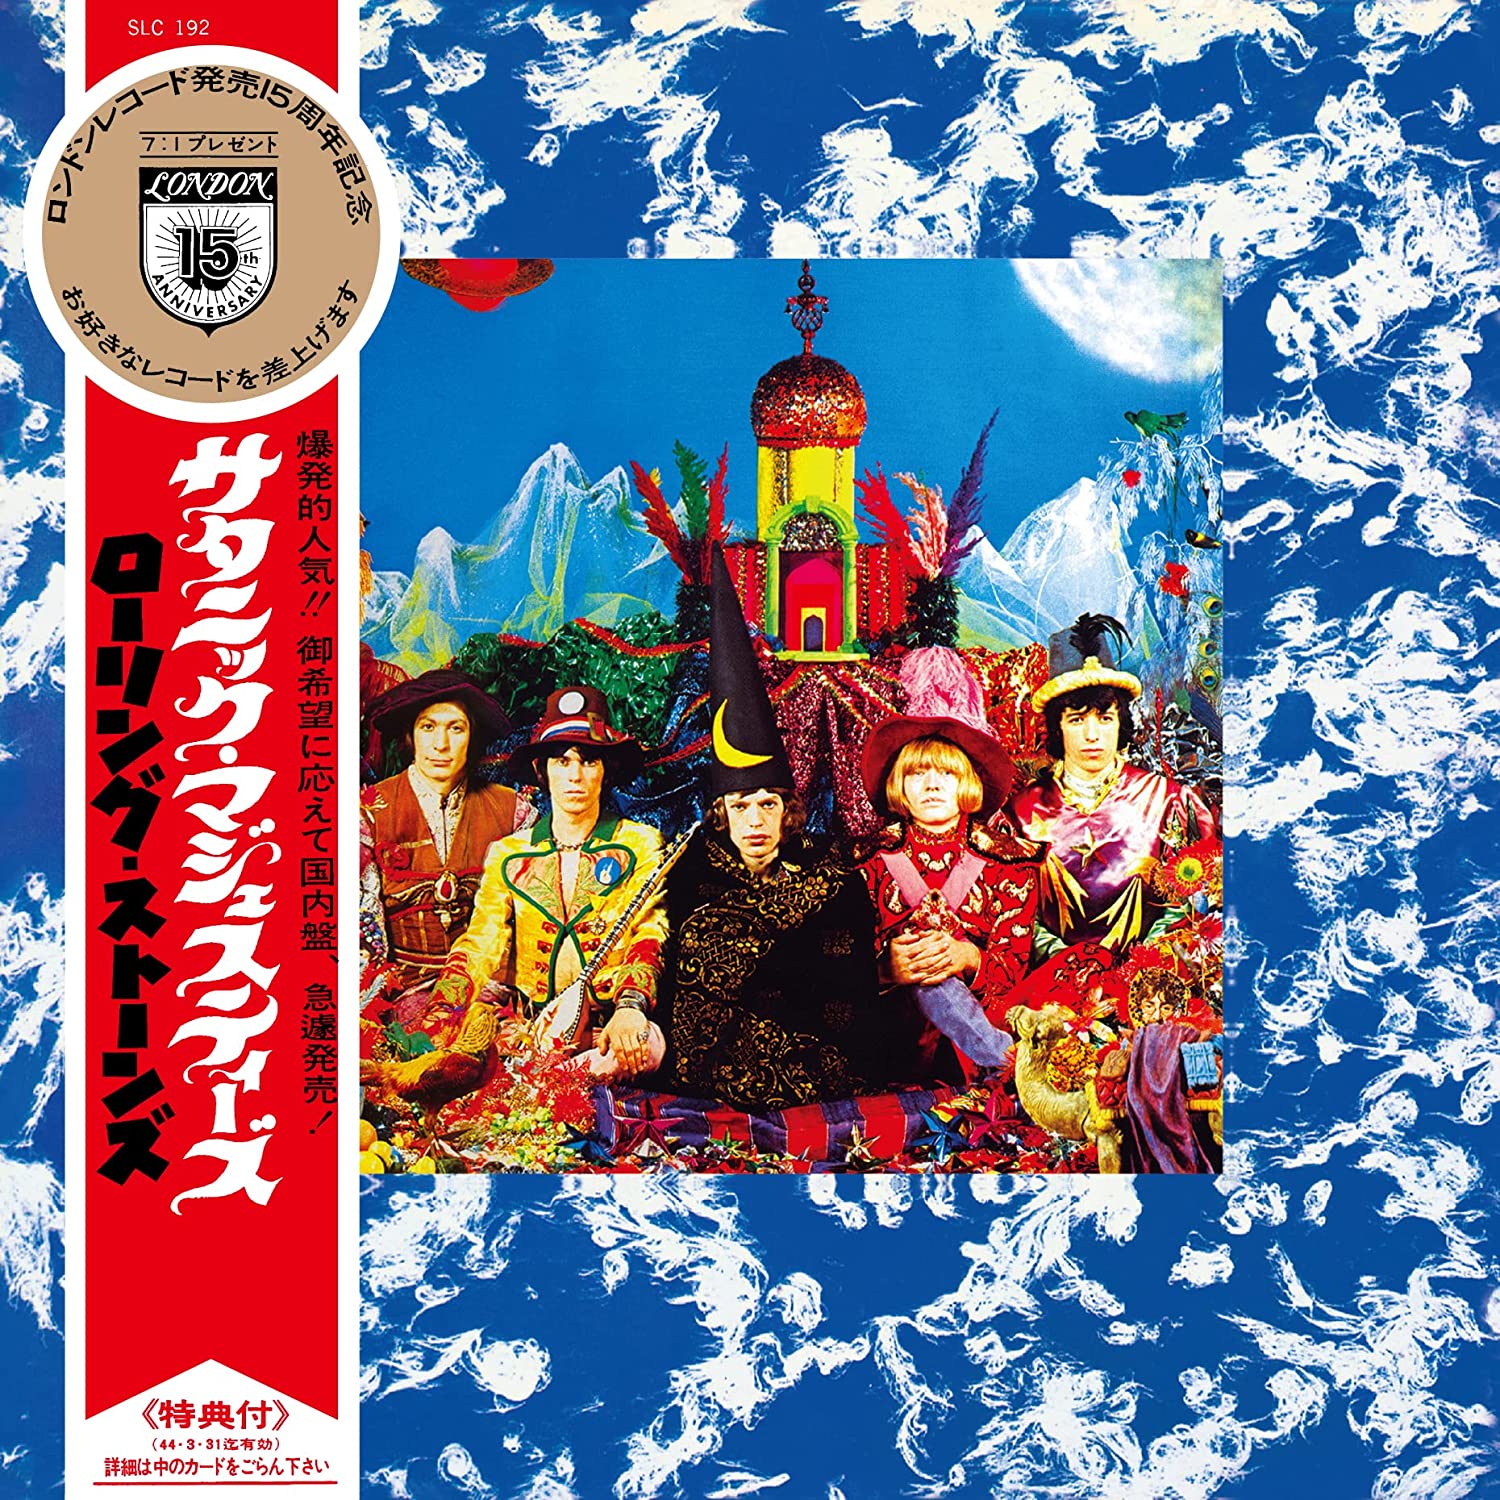 Their Satanic Majesties Request | The Rolling Stones